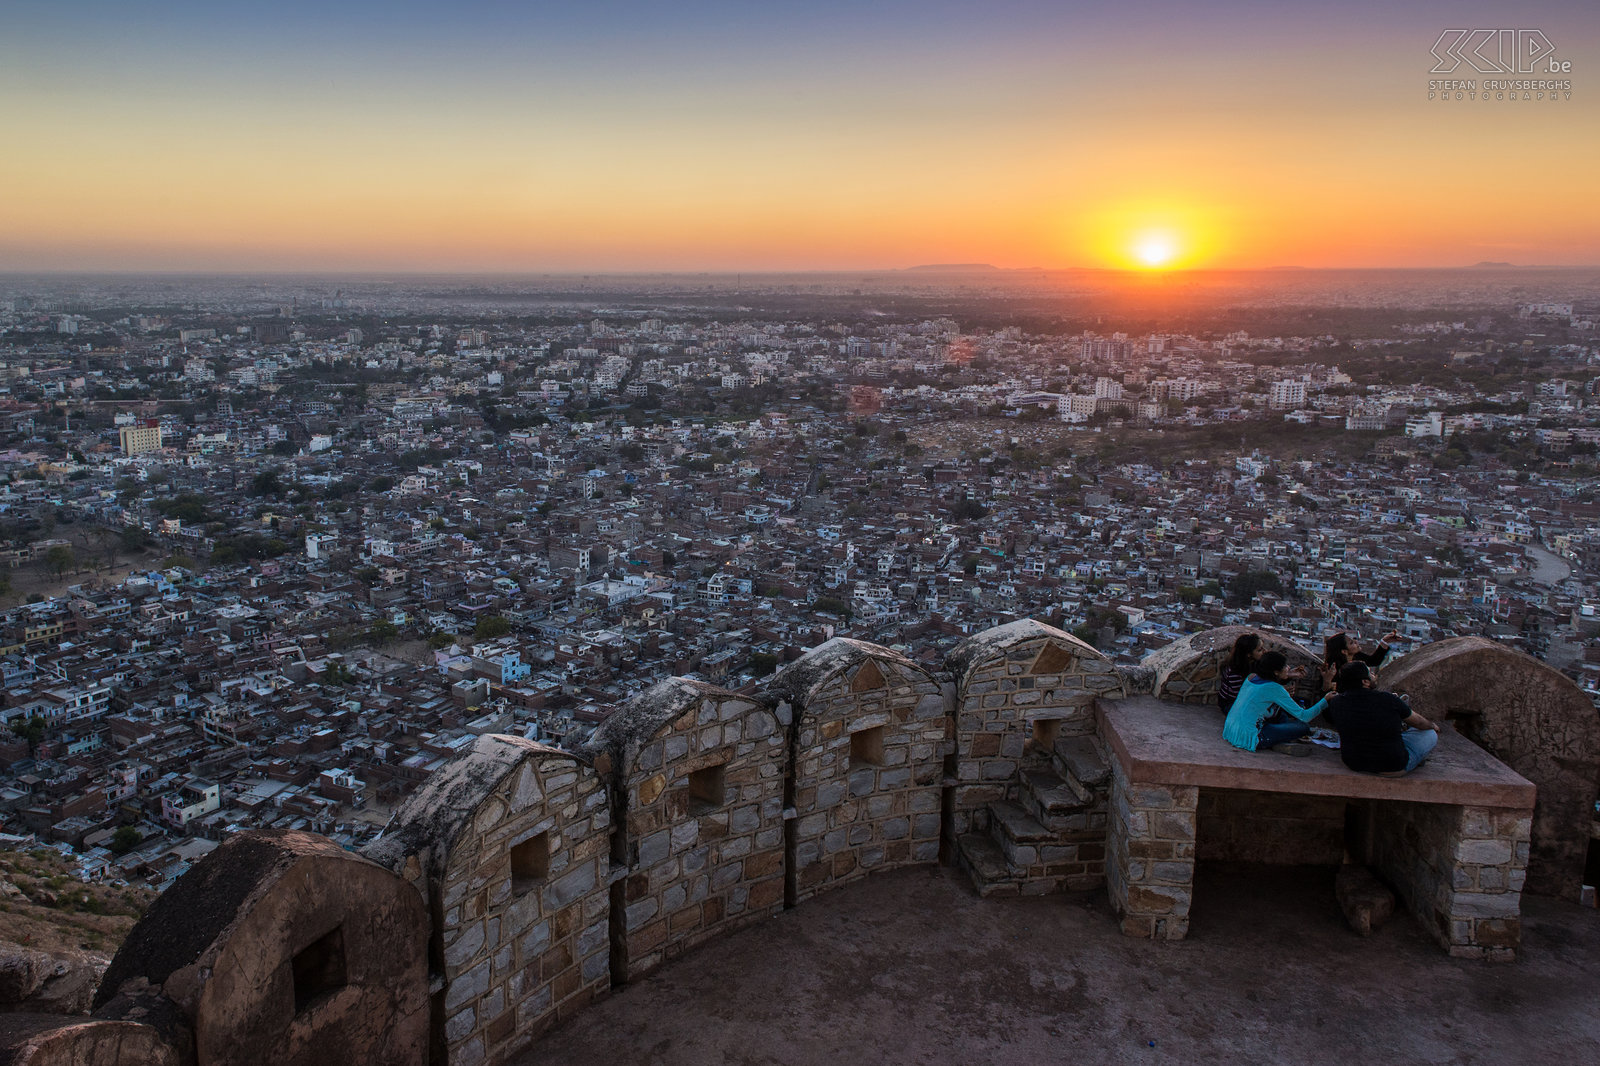 Jaipur - Sunset at Nahargarh fort Sunset from the Nahargarh fort/Tiger fort. This fortress in the Aravalli Hills gives a beautiful view of Jaipur. Stefan Cruysberghs